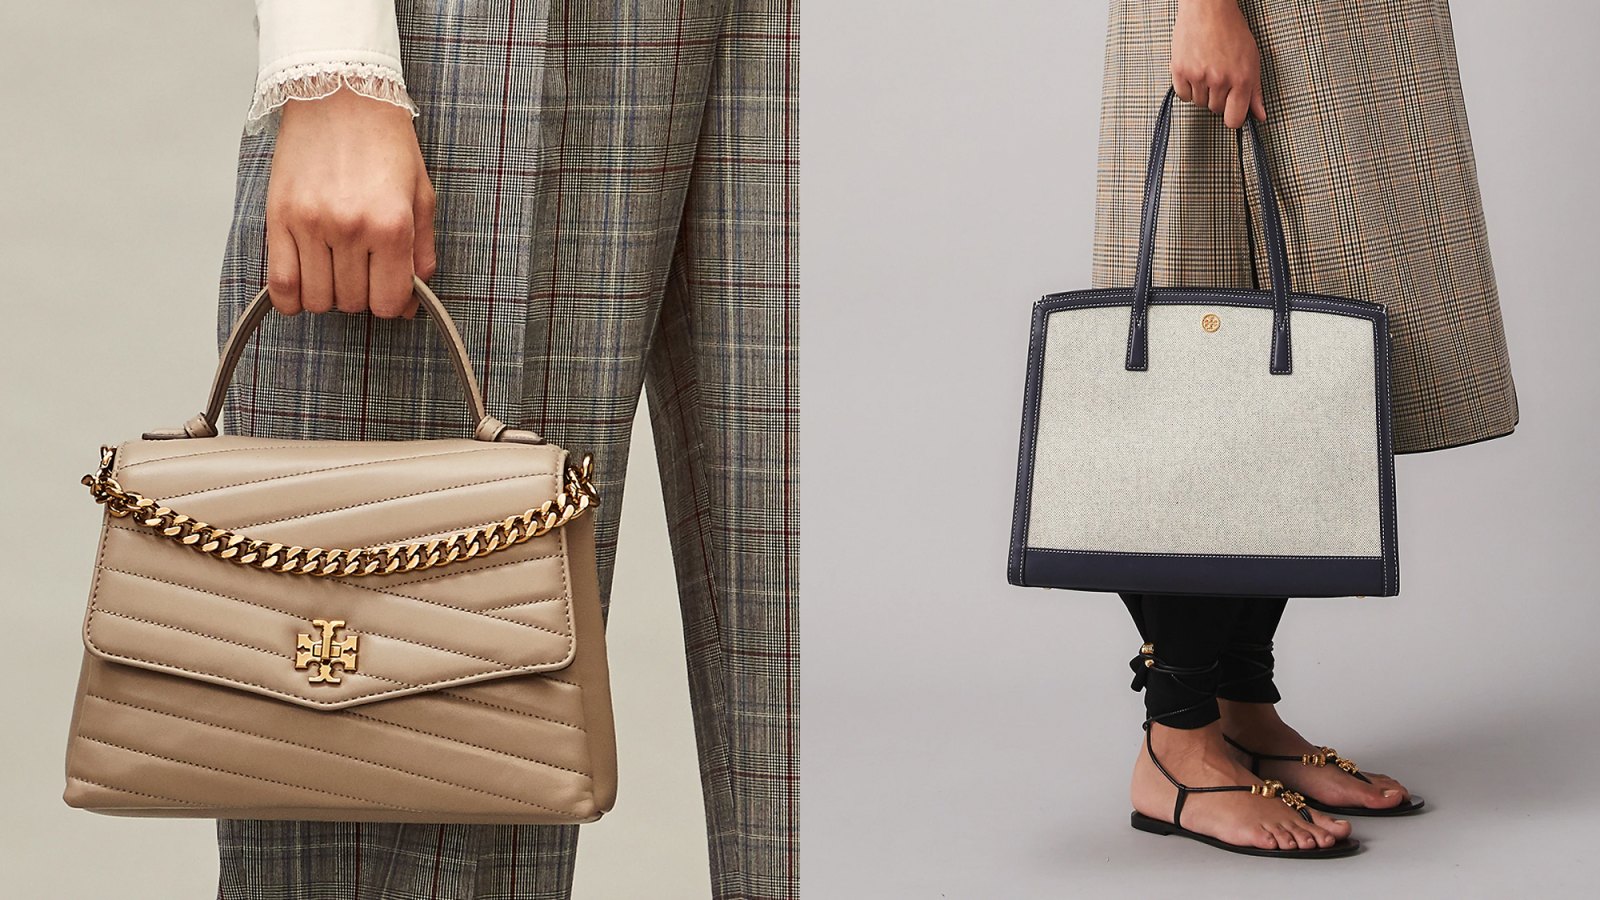 The Tory Burch Sale on Fall Shoes and Bags Is Almost Over - Parade